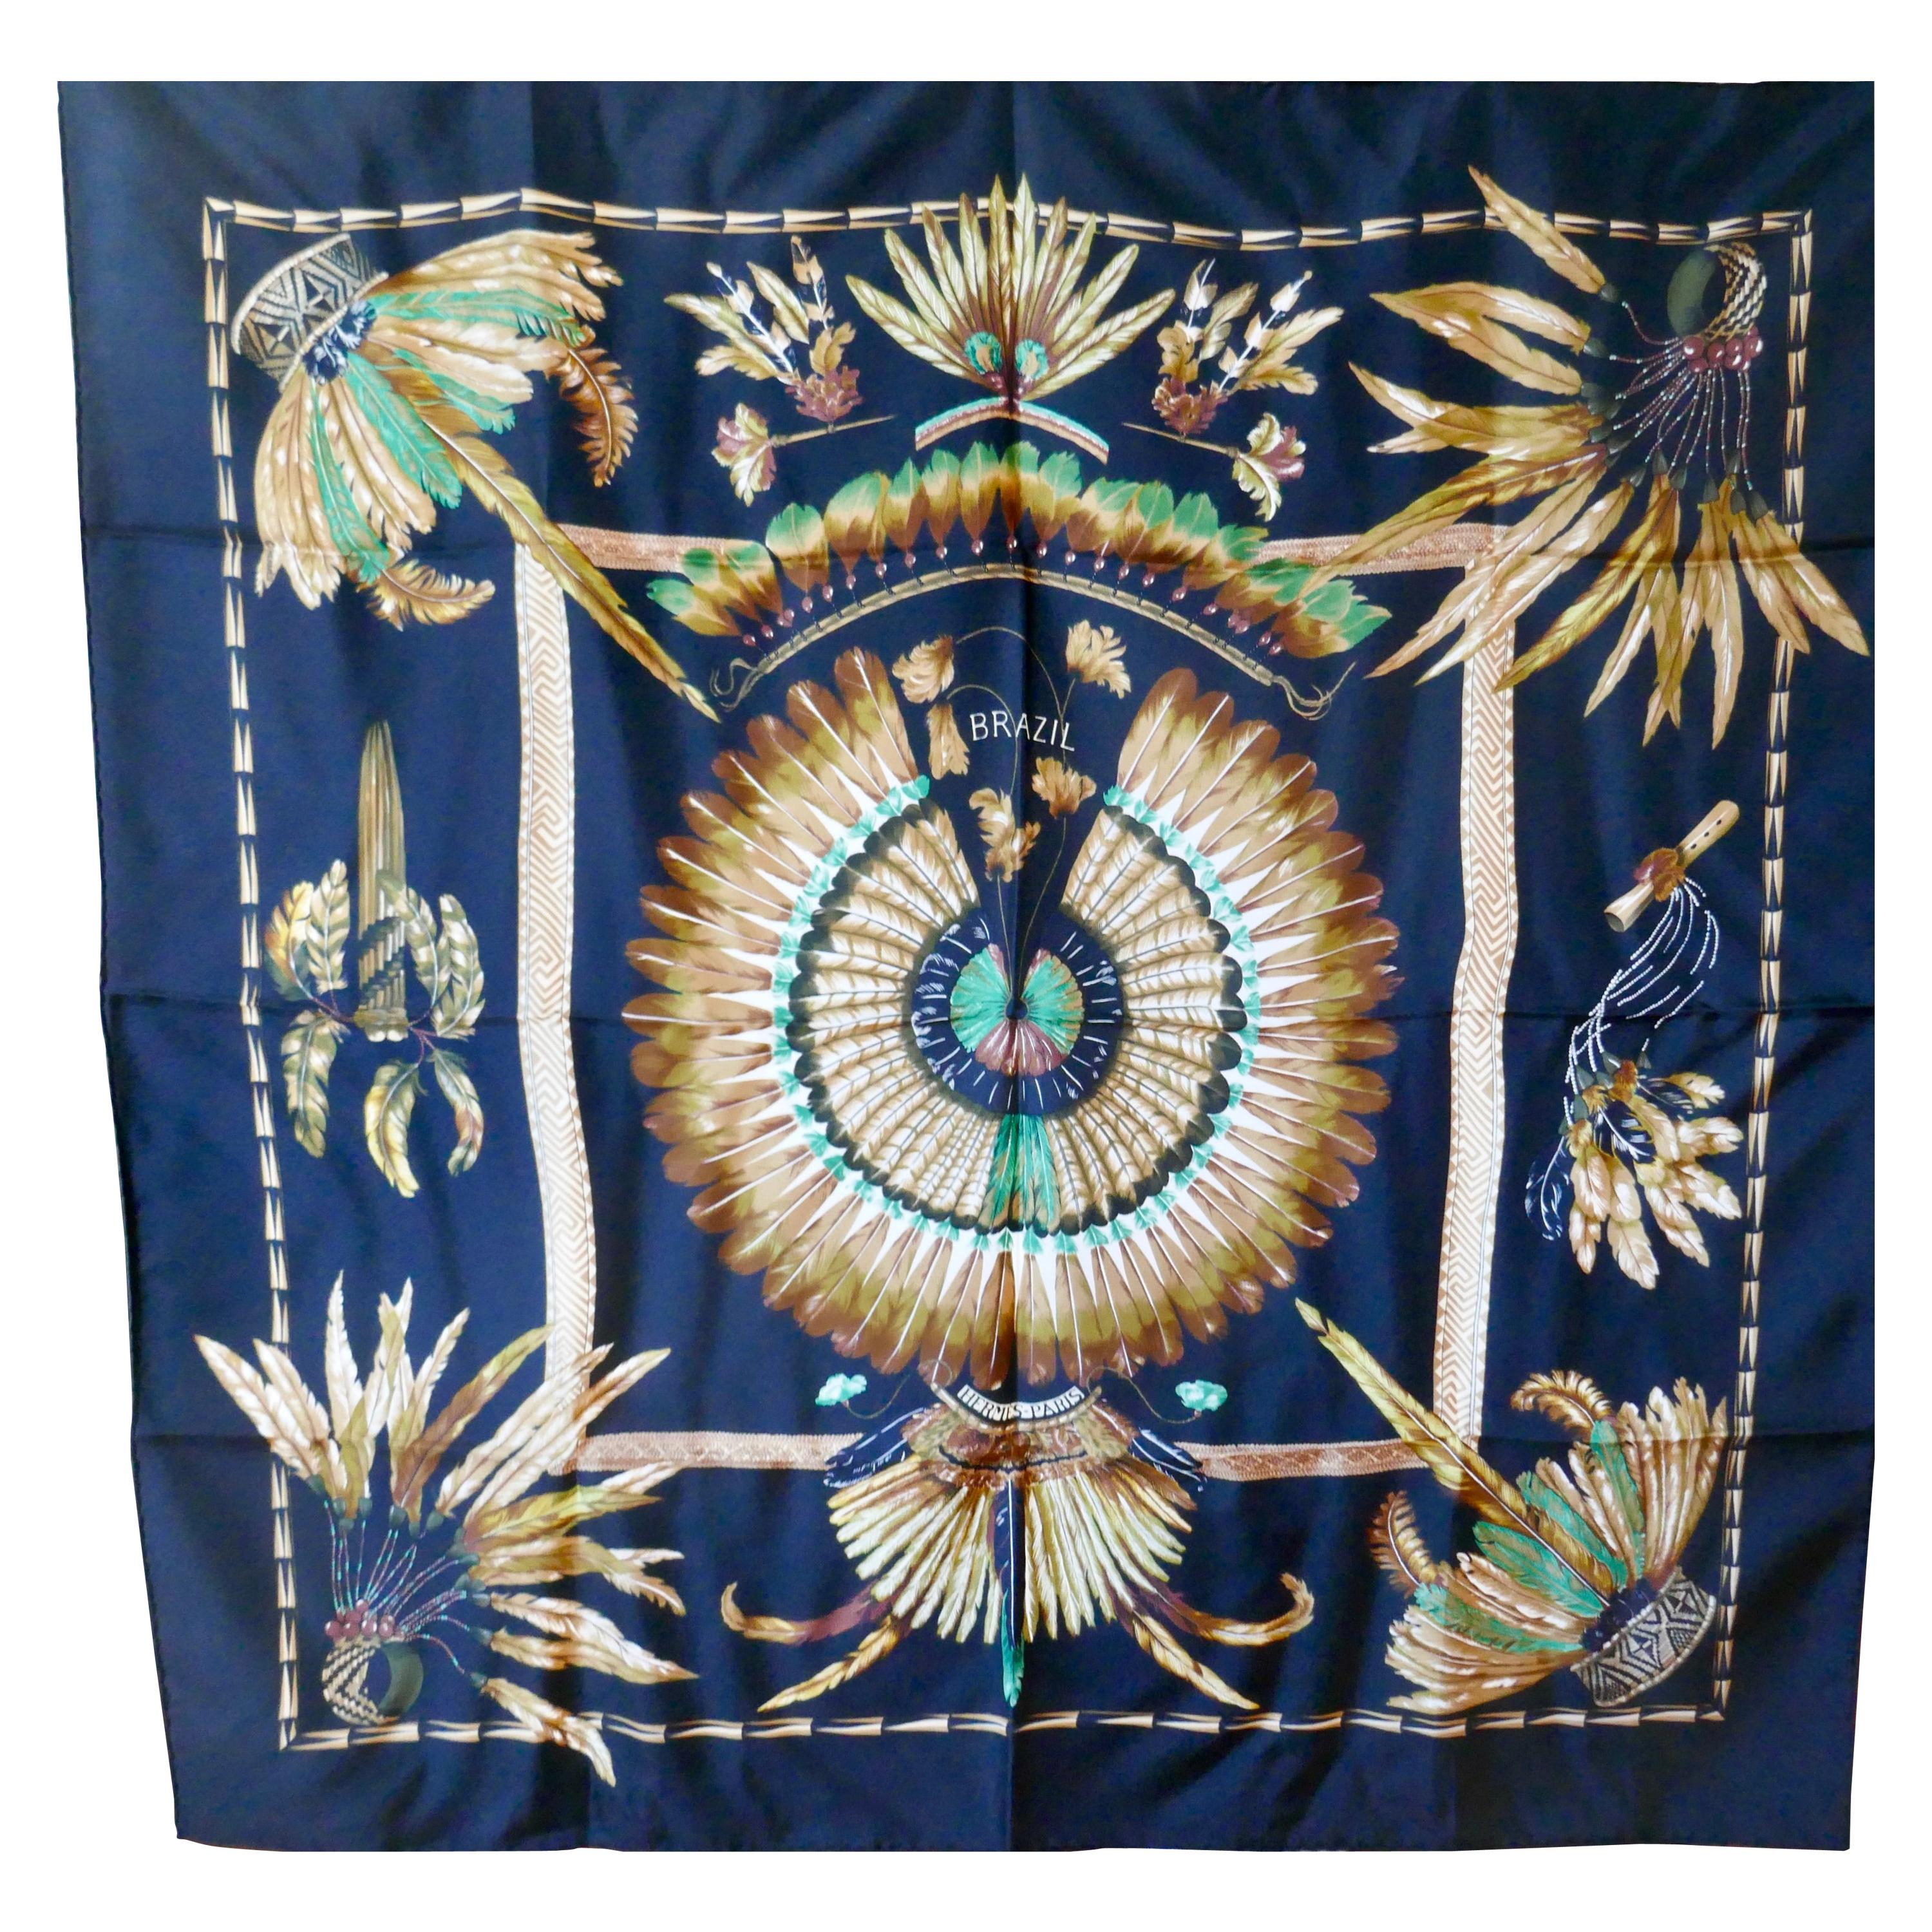 World Famous Hermes Silk Scarf “Brazil” by Laurence Bourthoumieux, 2001